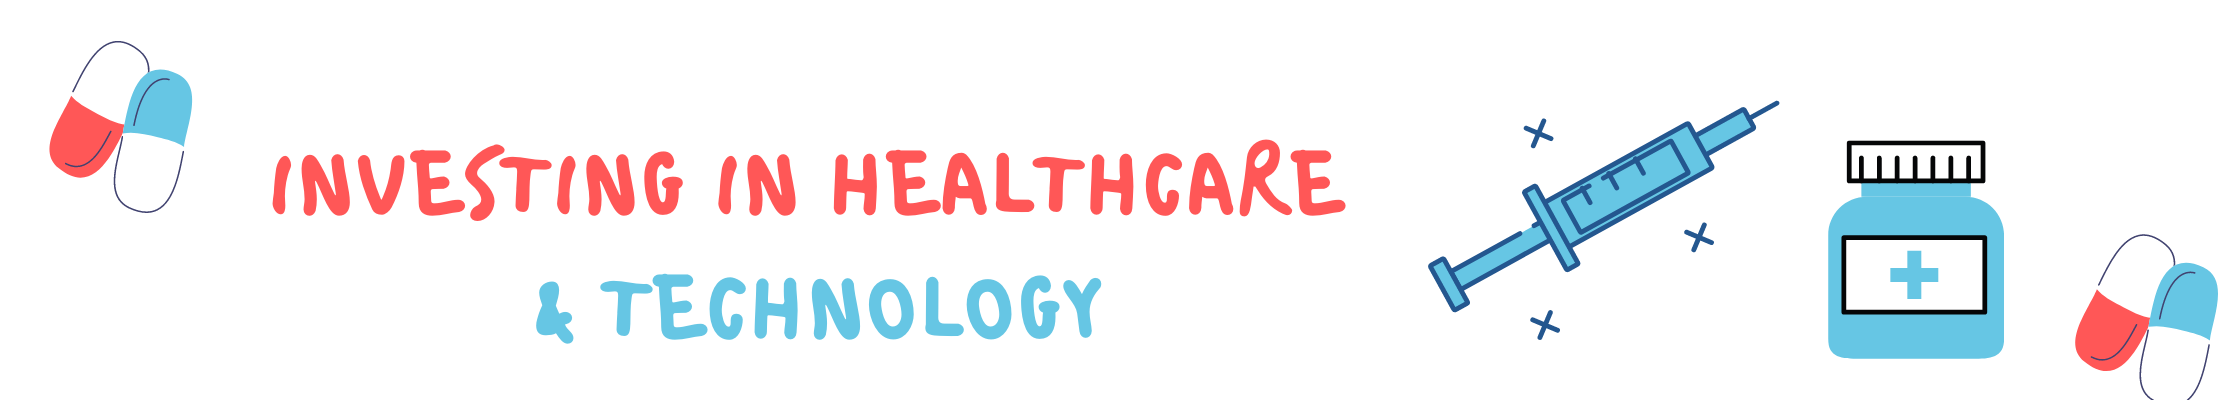 INVESTING IN HEALTHCARE & TECHNOLOGY